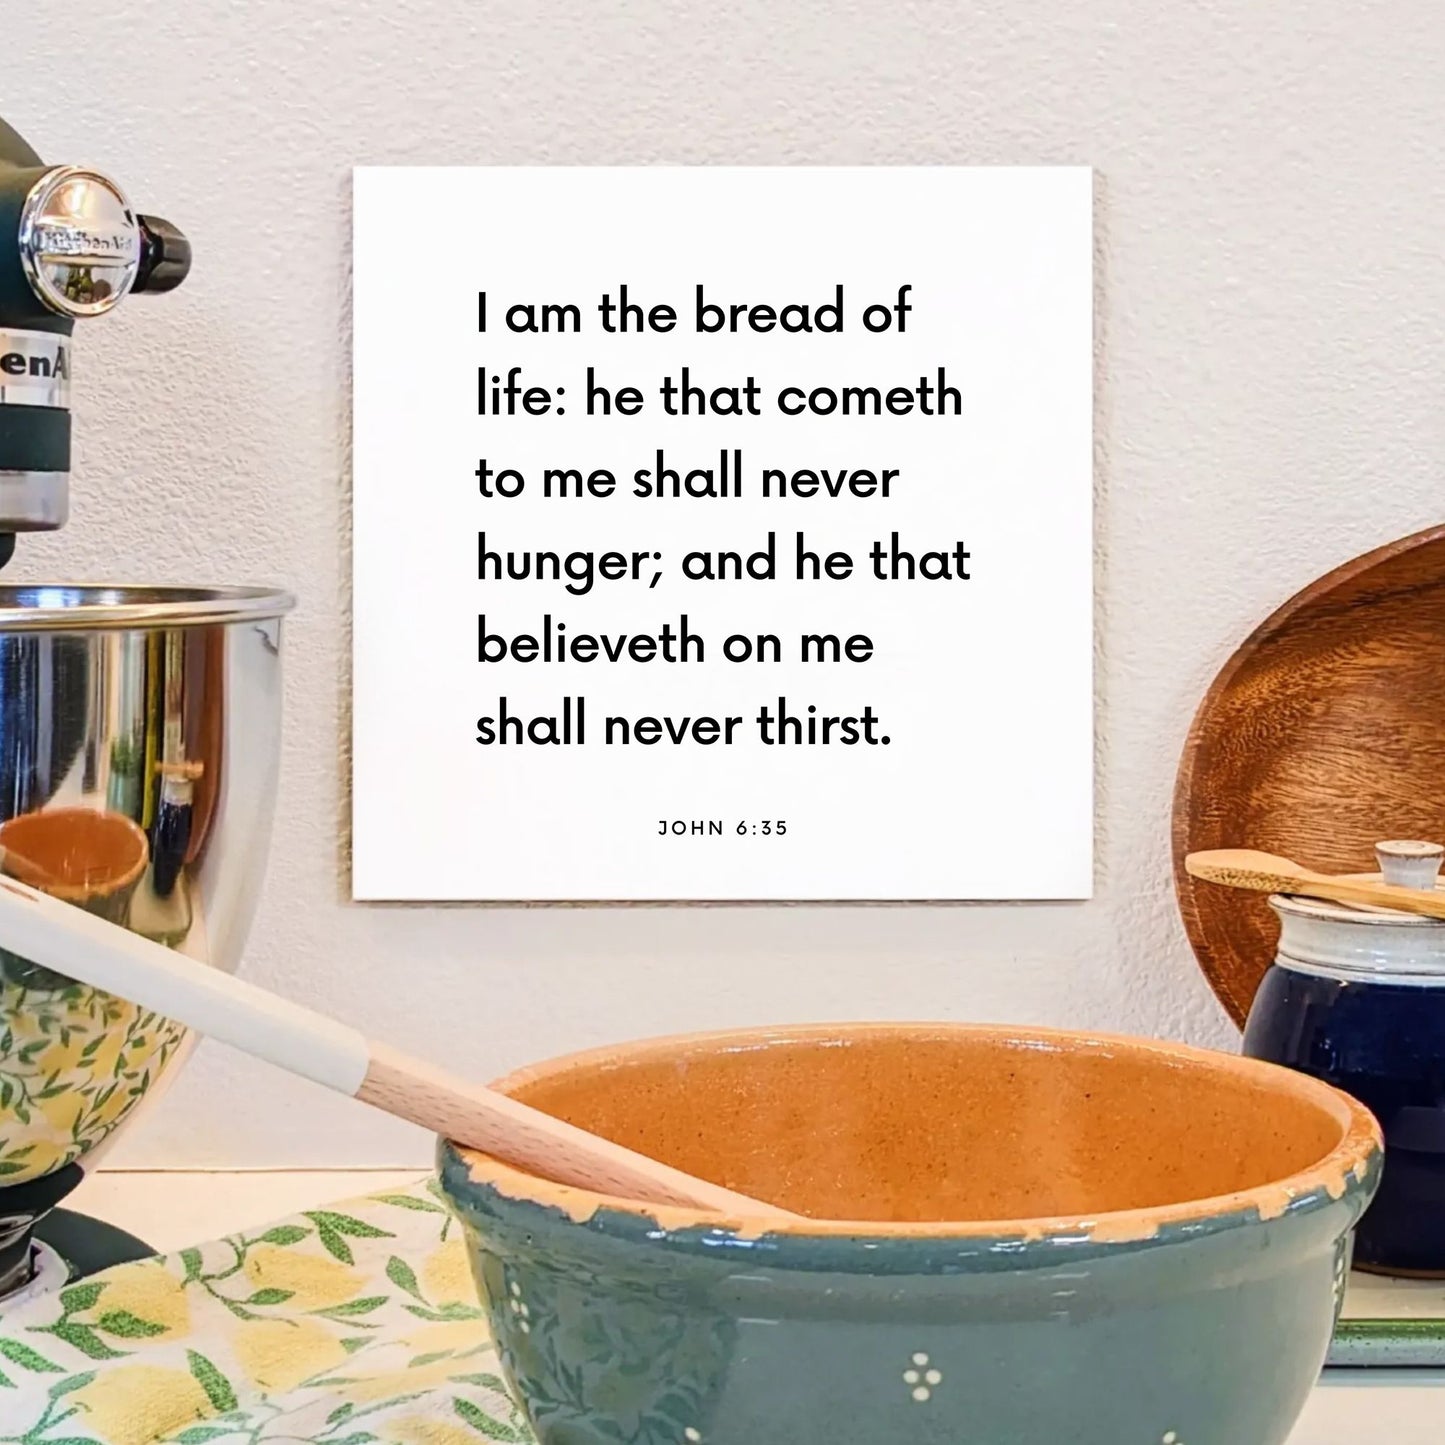 Kitchen mouting of the scripture tile for John 6:35 - "I am the bread of life"